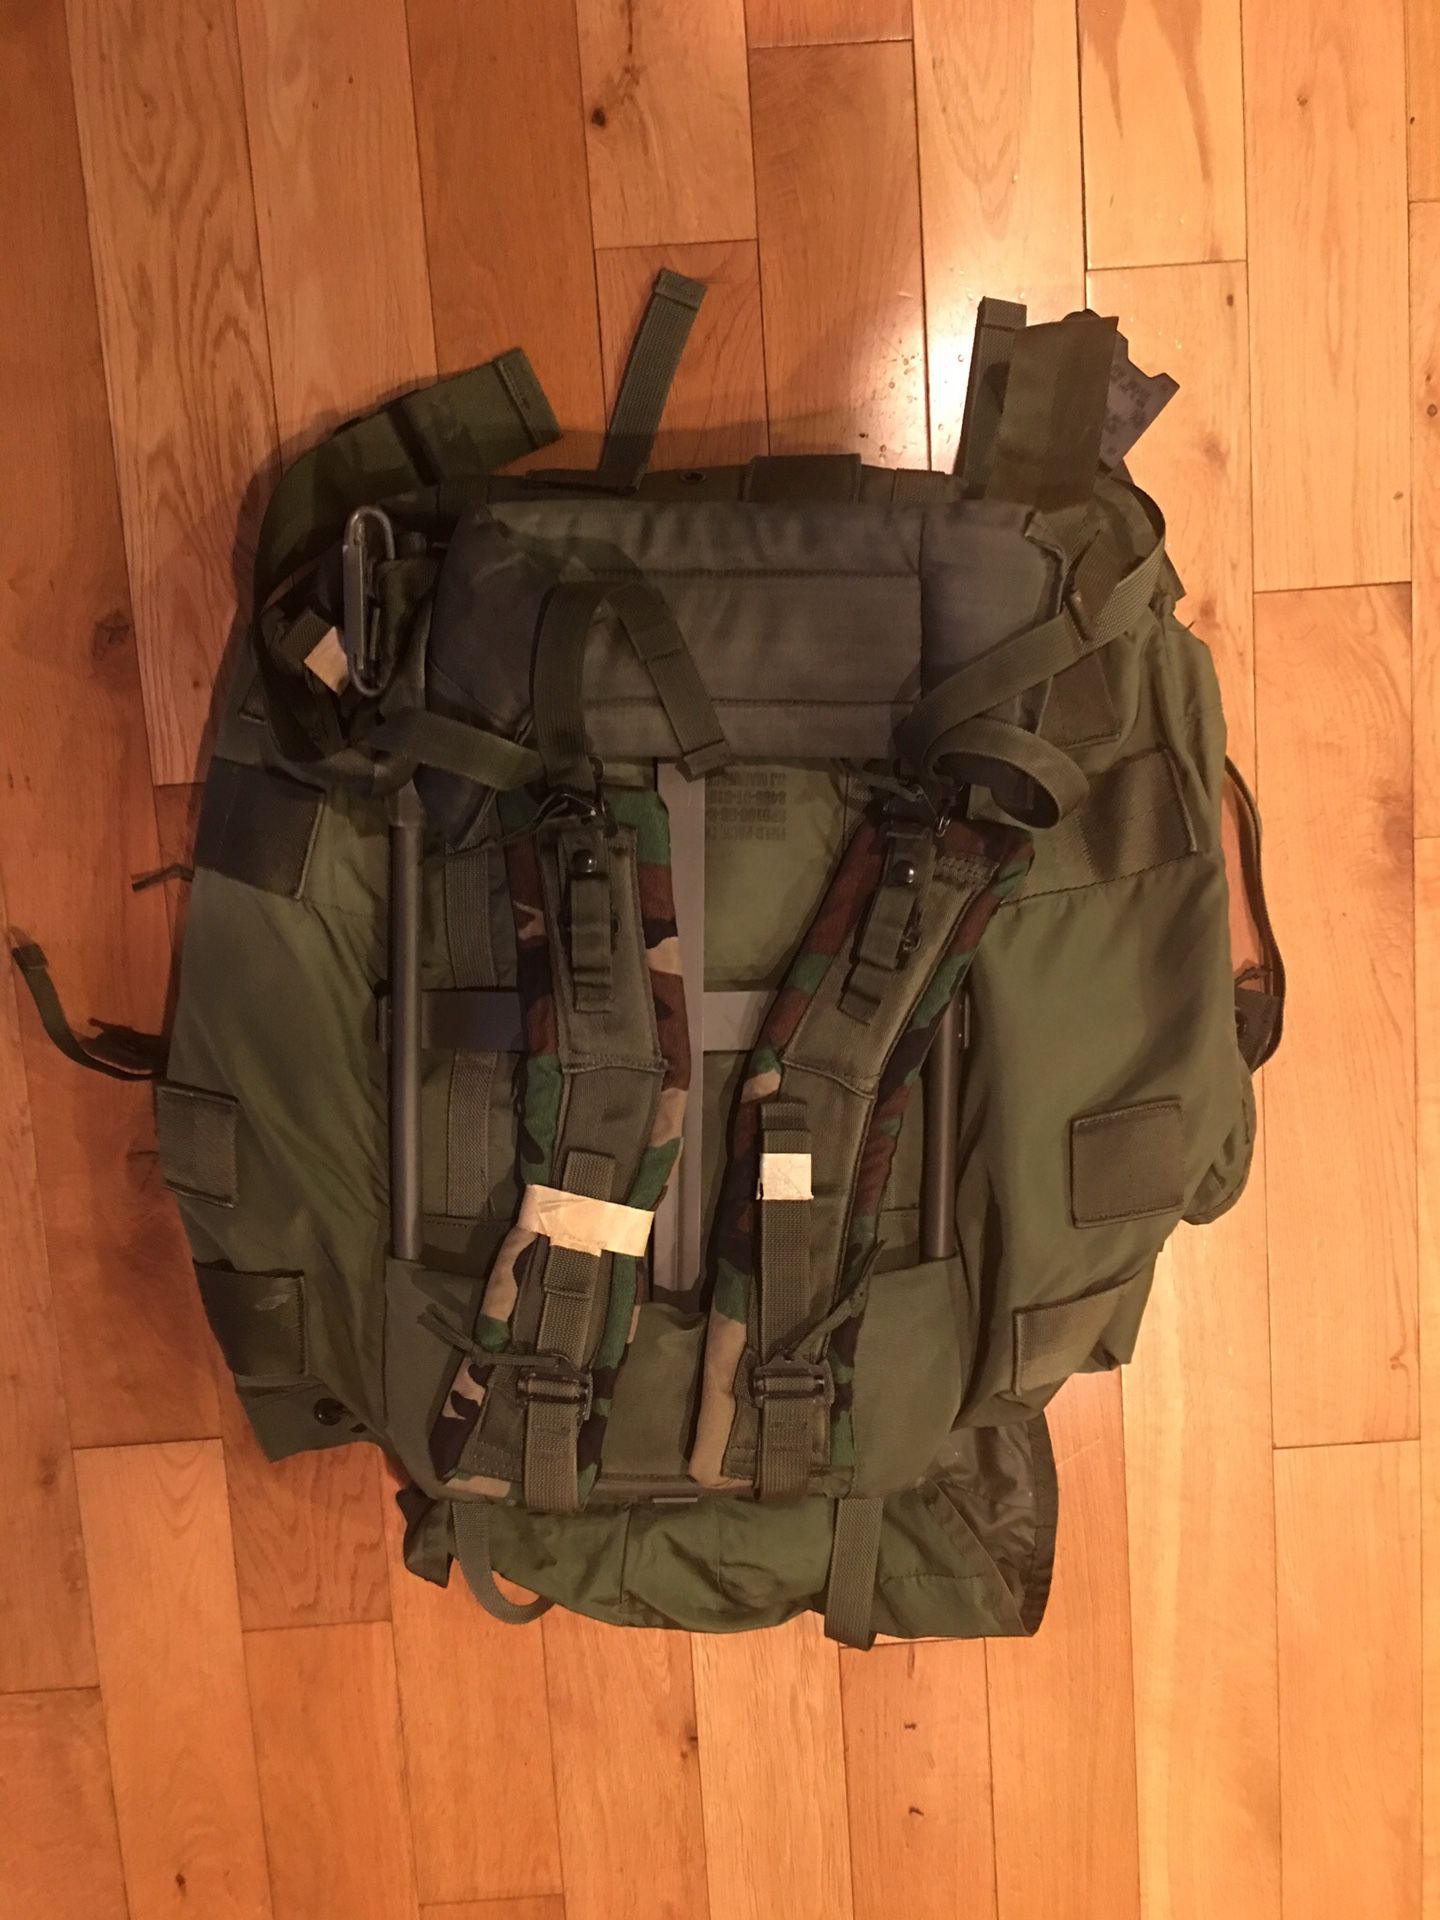 Army Alice pack great for backpacking, camping and airborne operations.